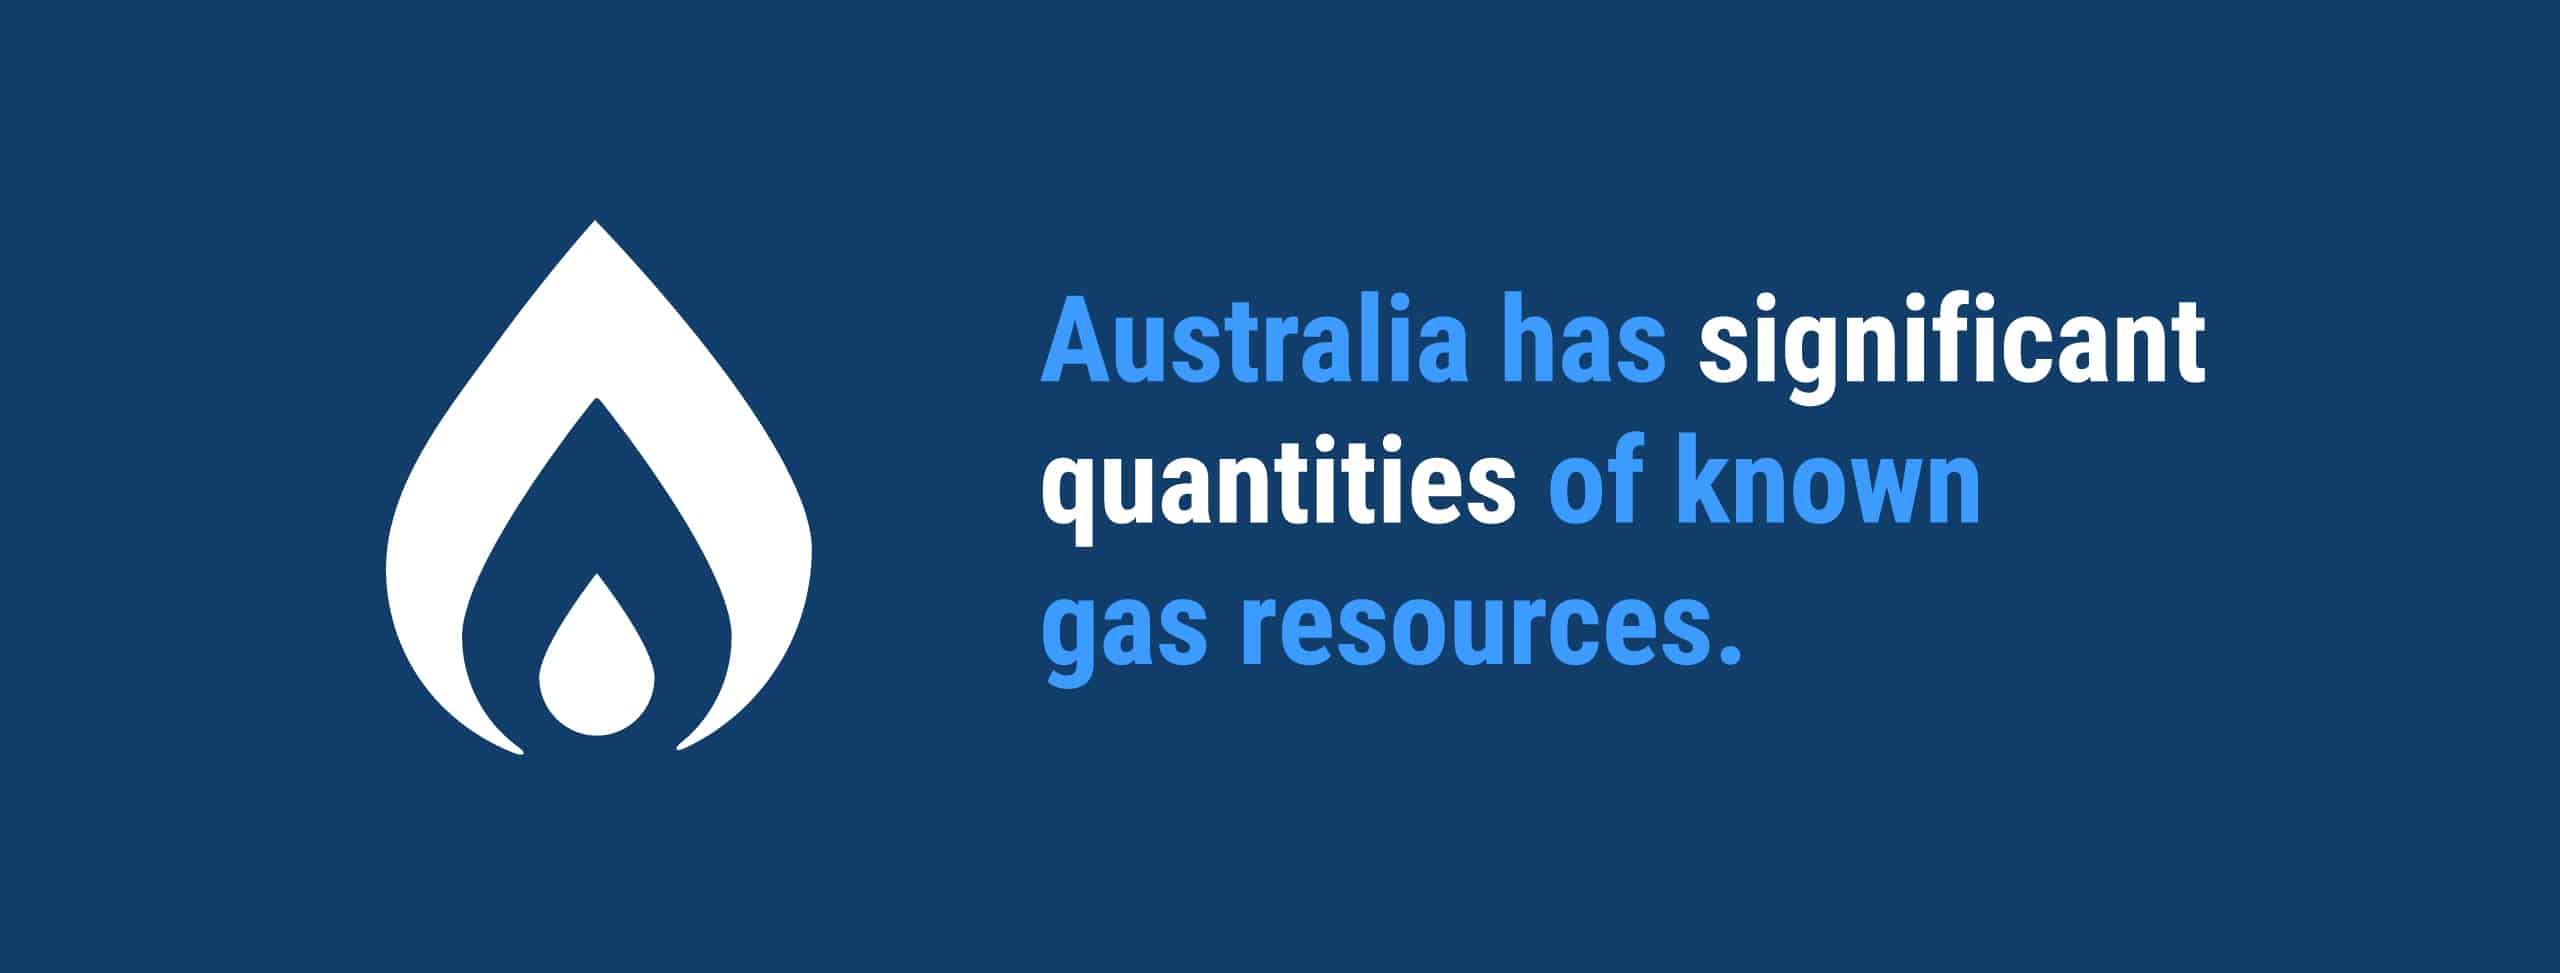 "Australia has significant quantities of known gas resources."